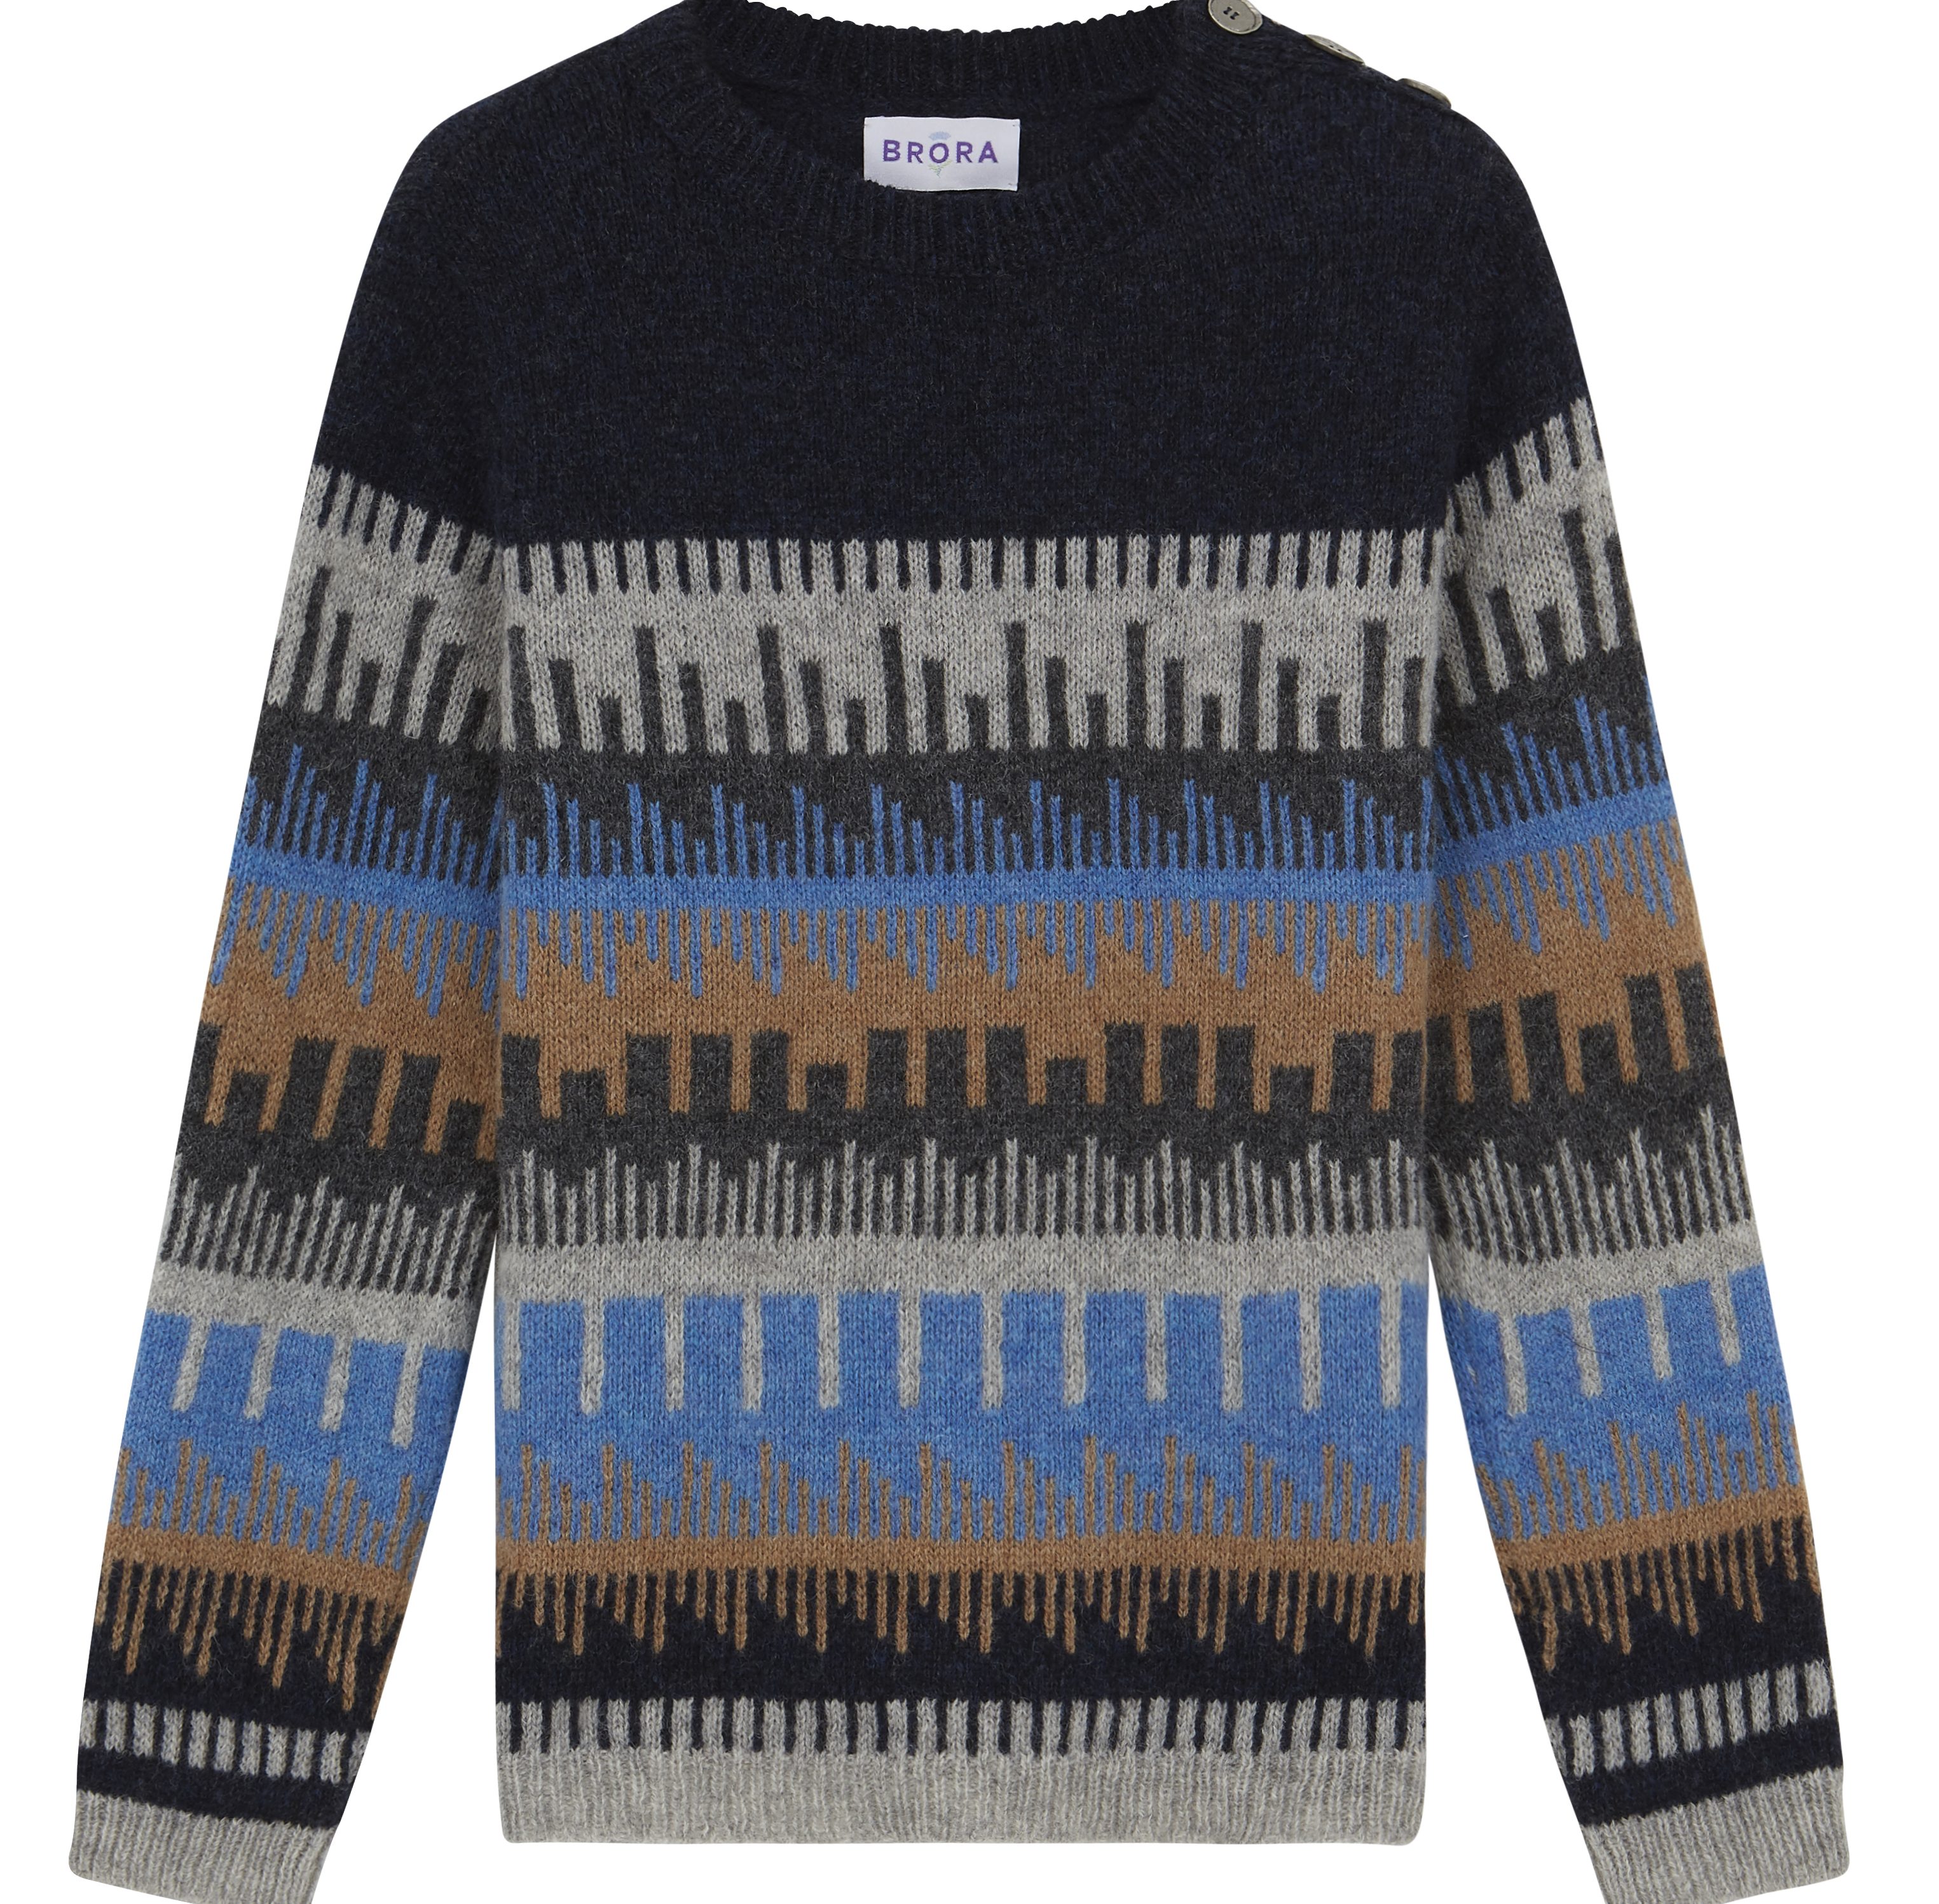 The award winning lambswool jumper featuring the famous Coxs Stack